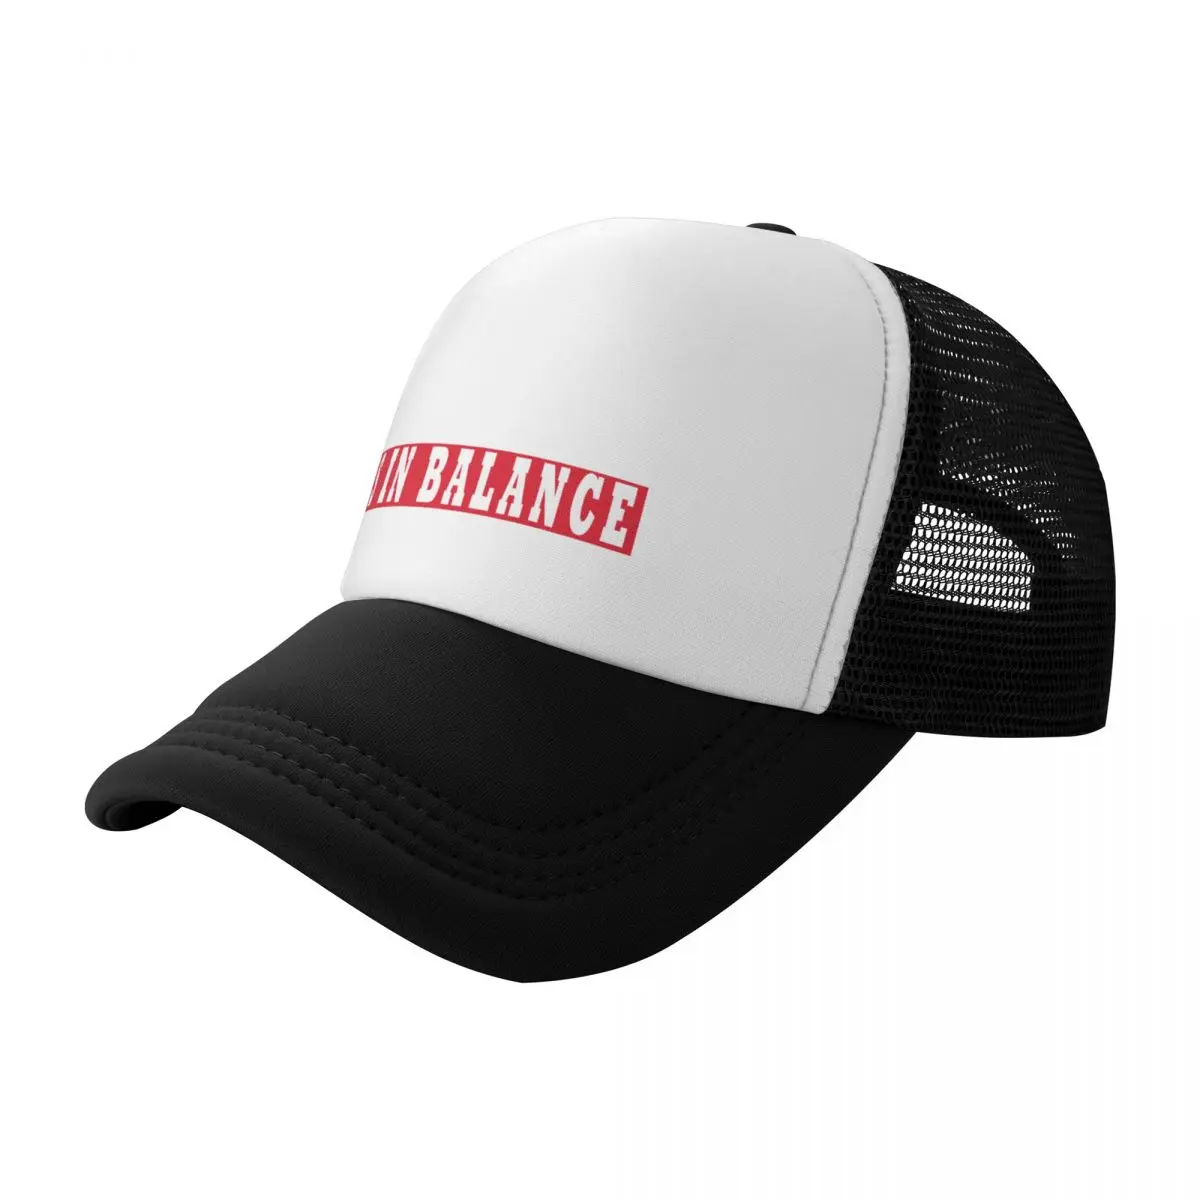 

Everything Is In Balance - Everything In Life Is Balance Funny Quote Saying With Baseball Cap Brand Man cap Mens Hats Women's